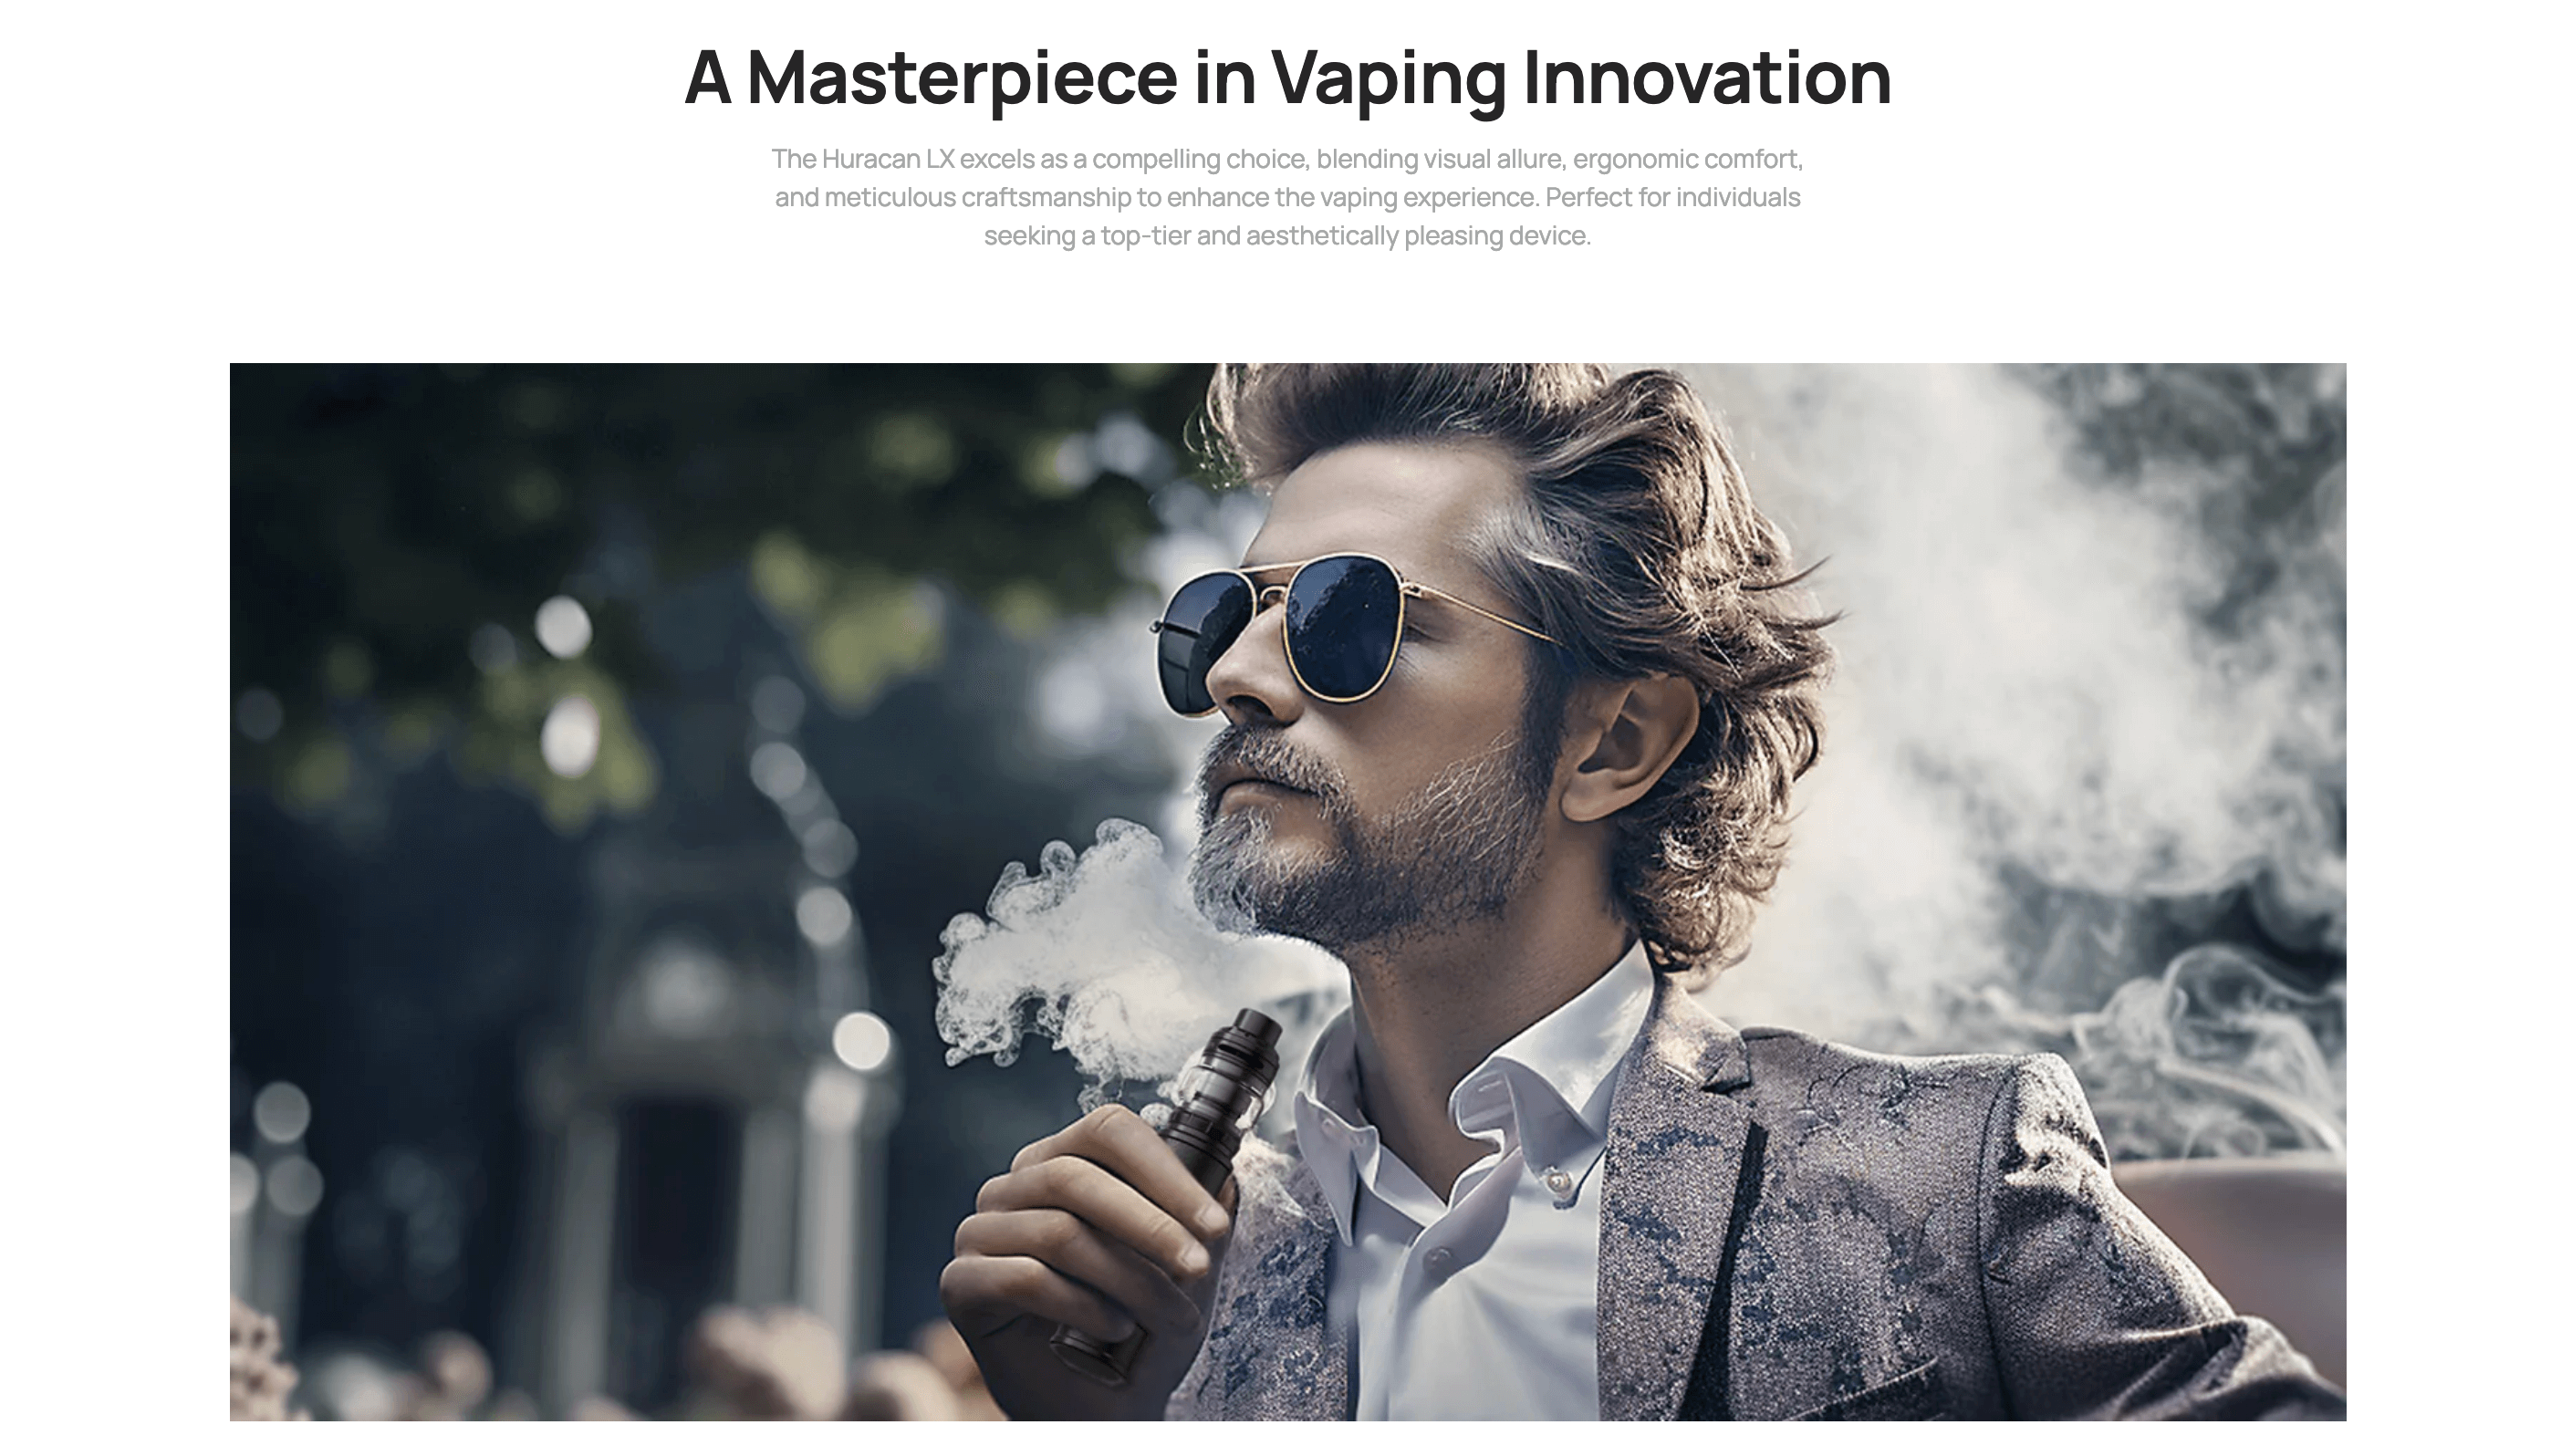 Aspire Huracan LX - A masterpiece in vaping innovation